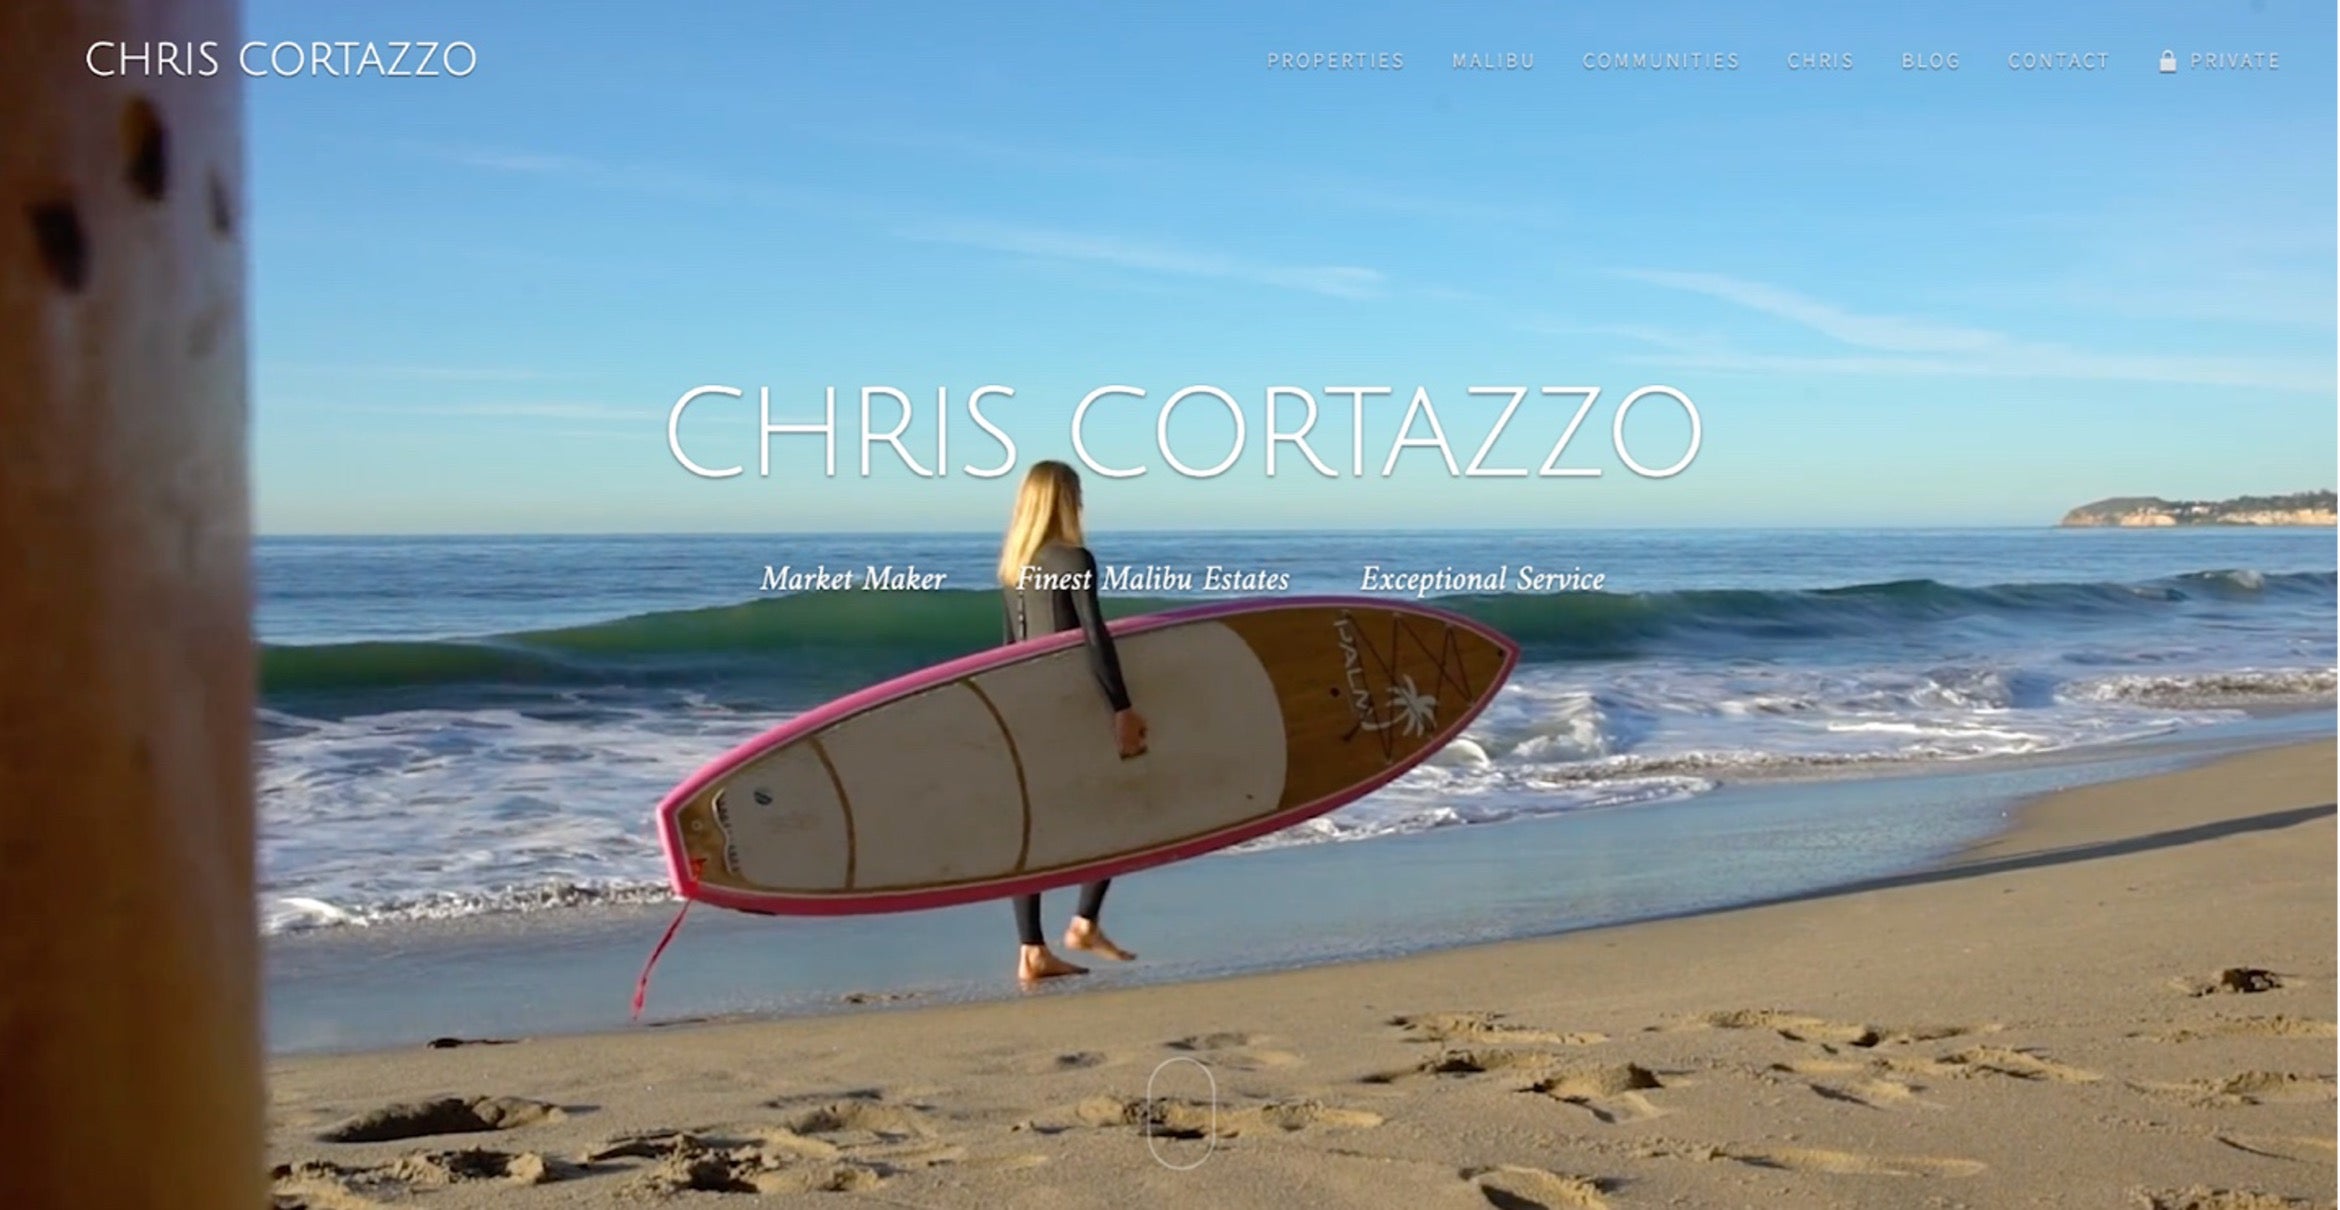 Website banner for Chris Cortazzo featuring a beach scene with a person holding a surfboard, symbolizing a lifestyle of luxury Malibu real estate.